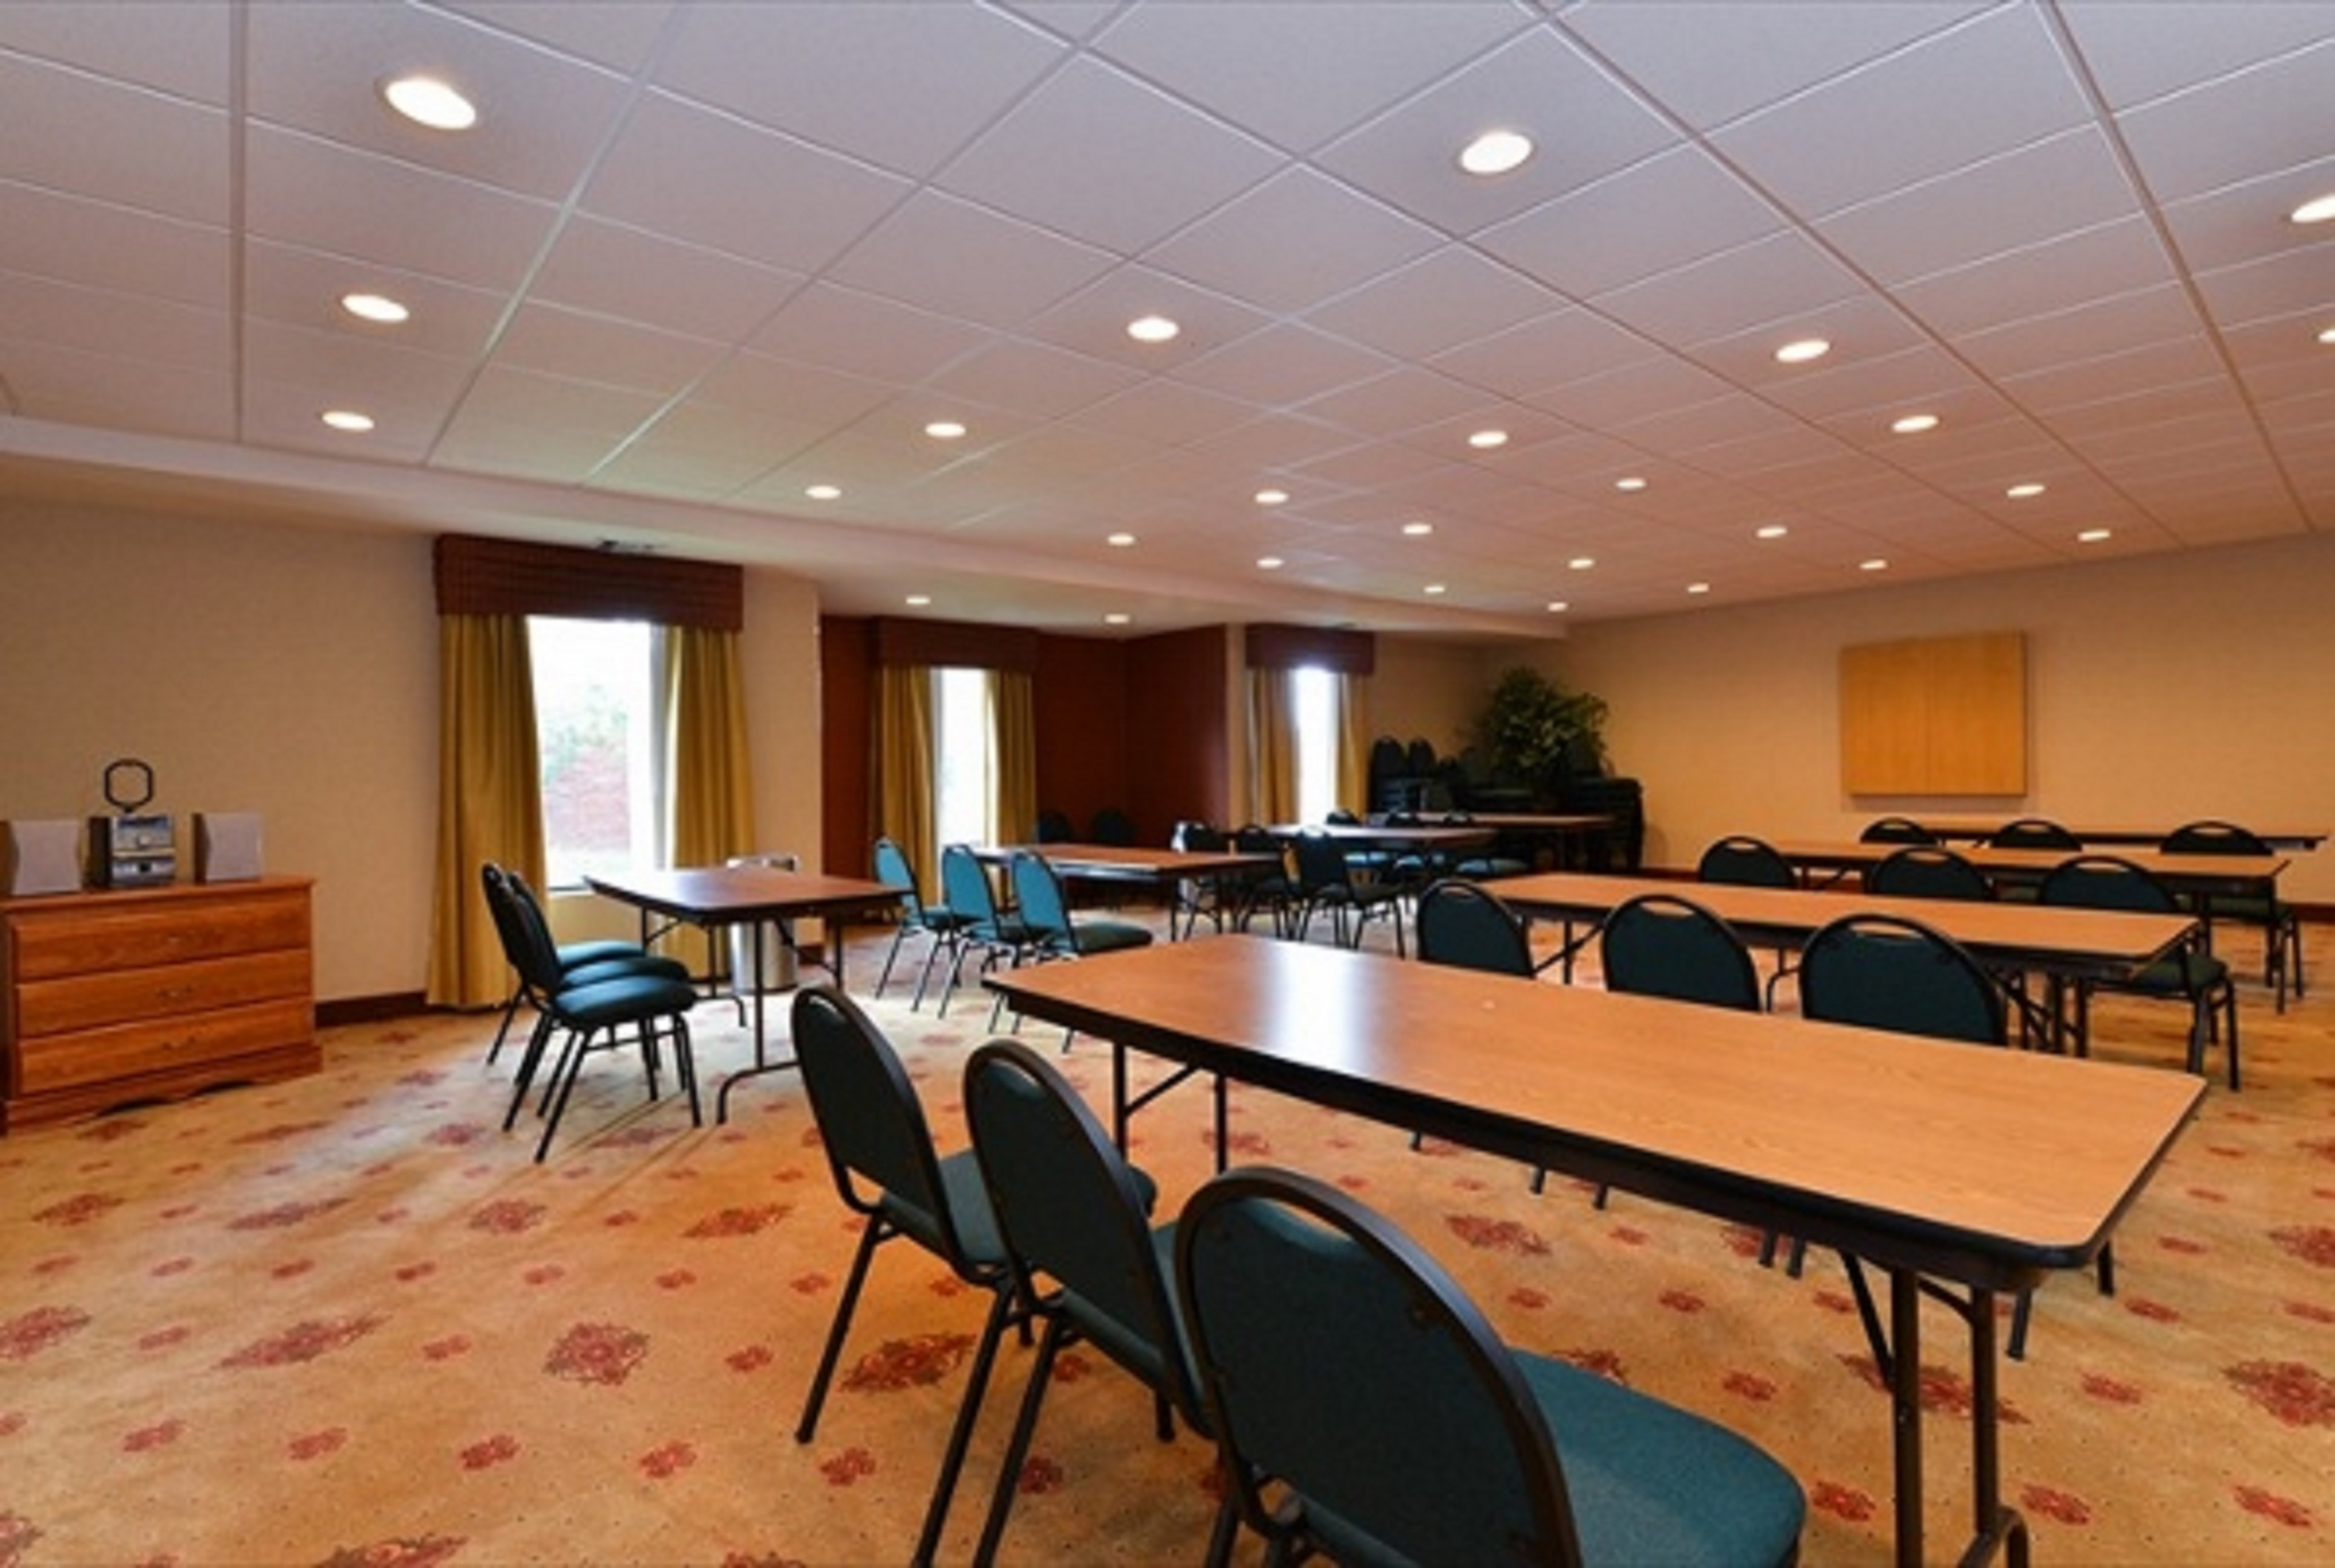 Our Meeting Room can accomodate up to 75 people.